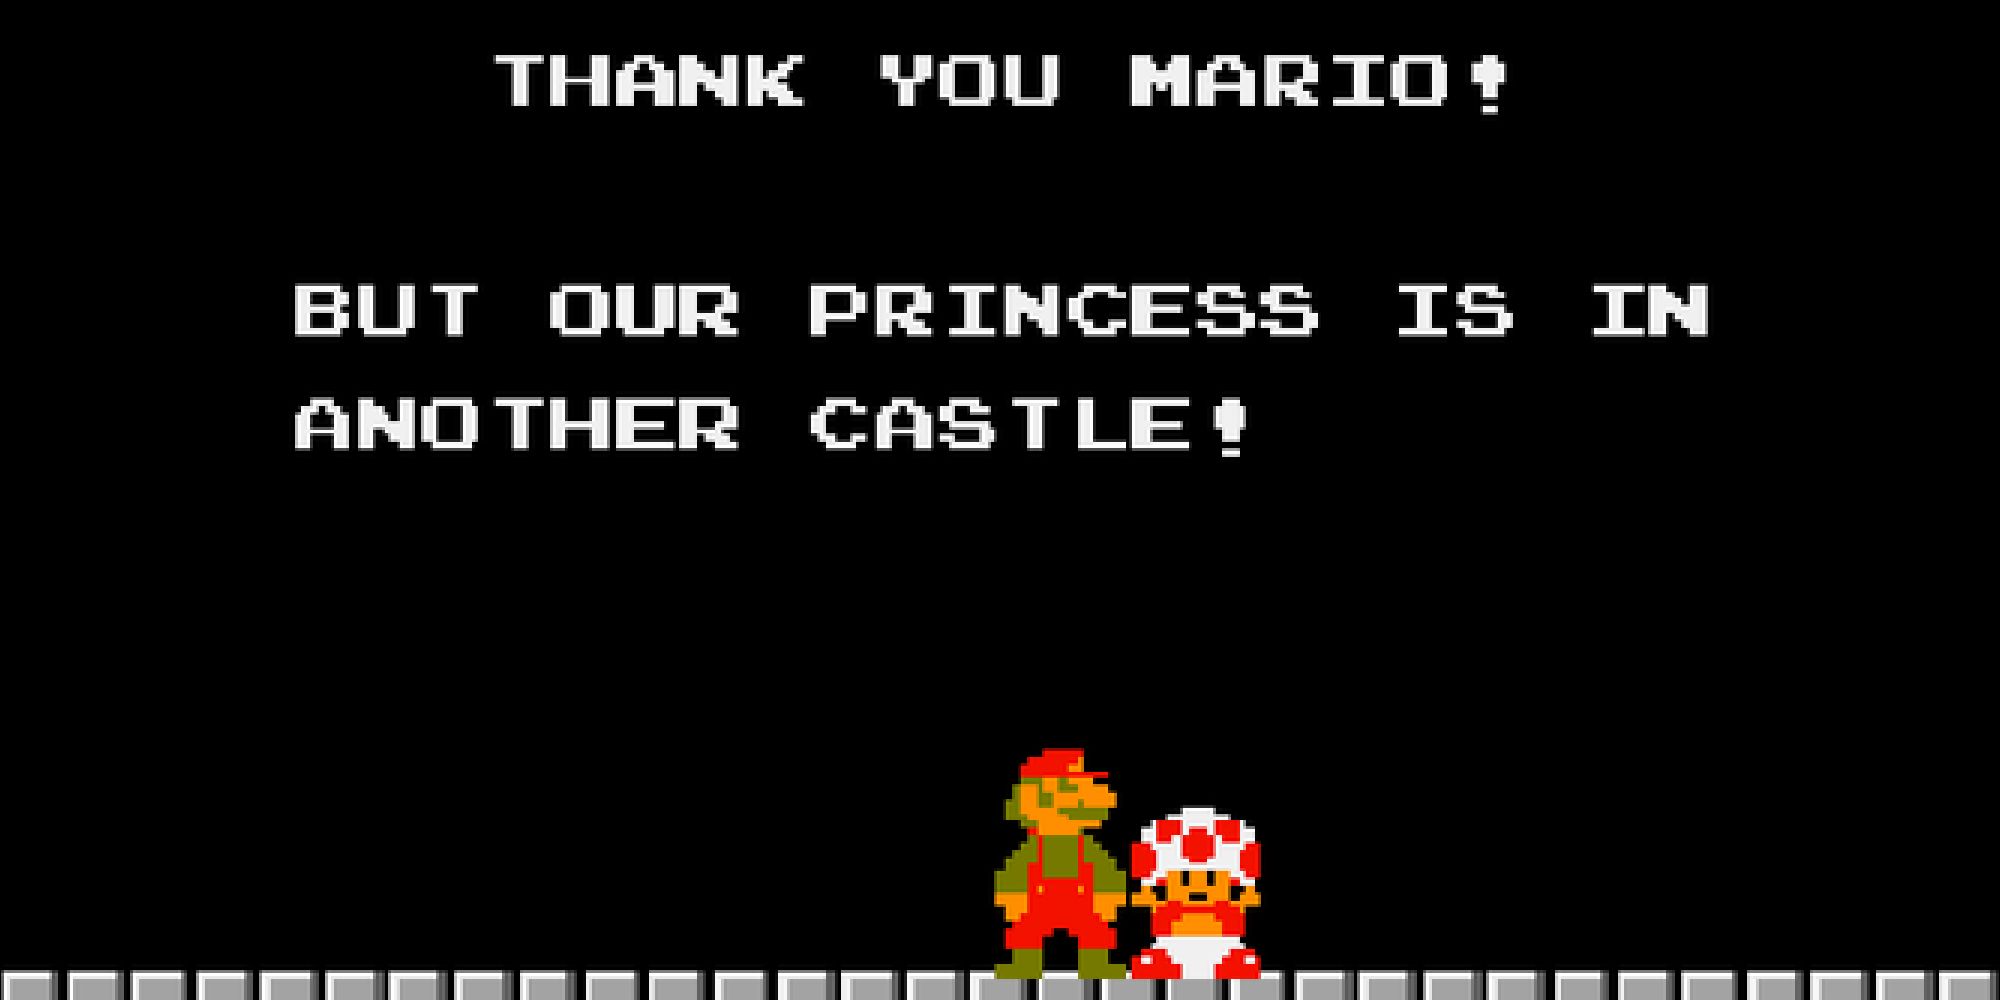 Toad telling Mario that the princess is in another castle in Super Mario Bros.